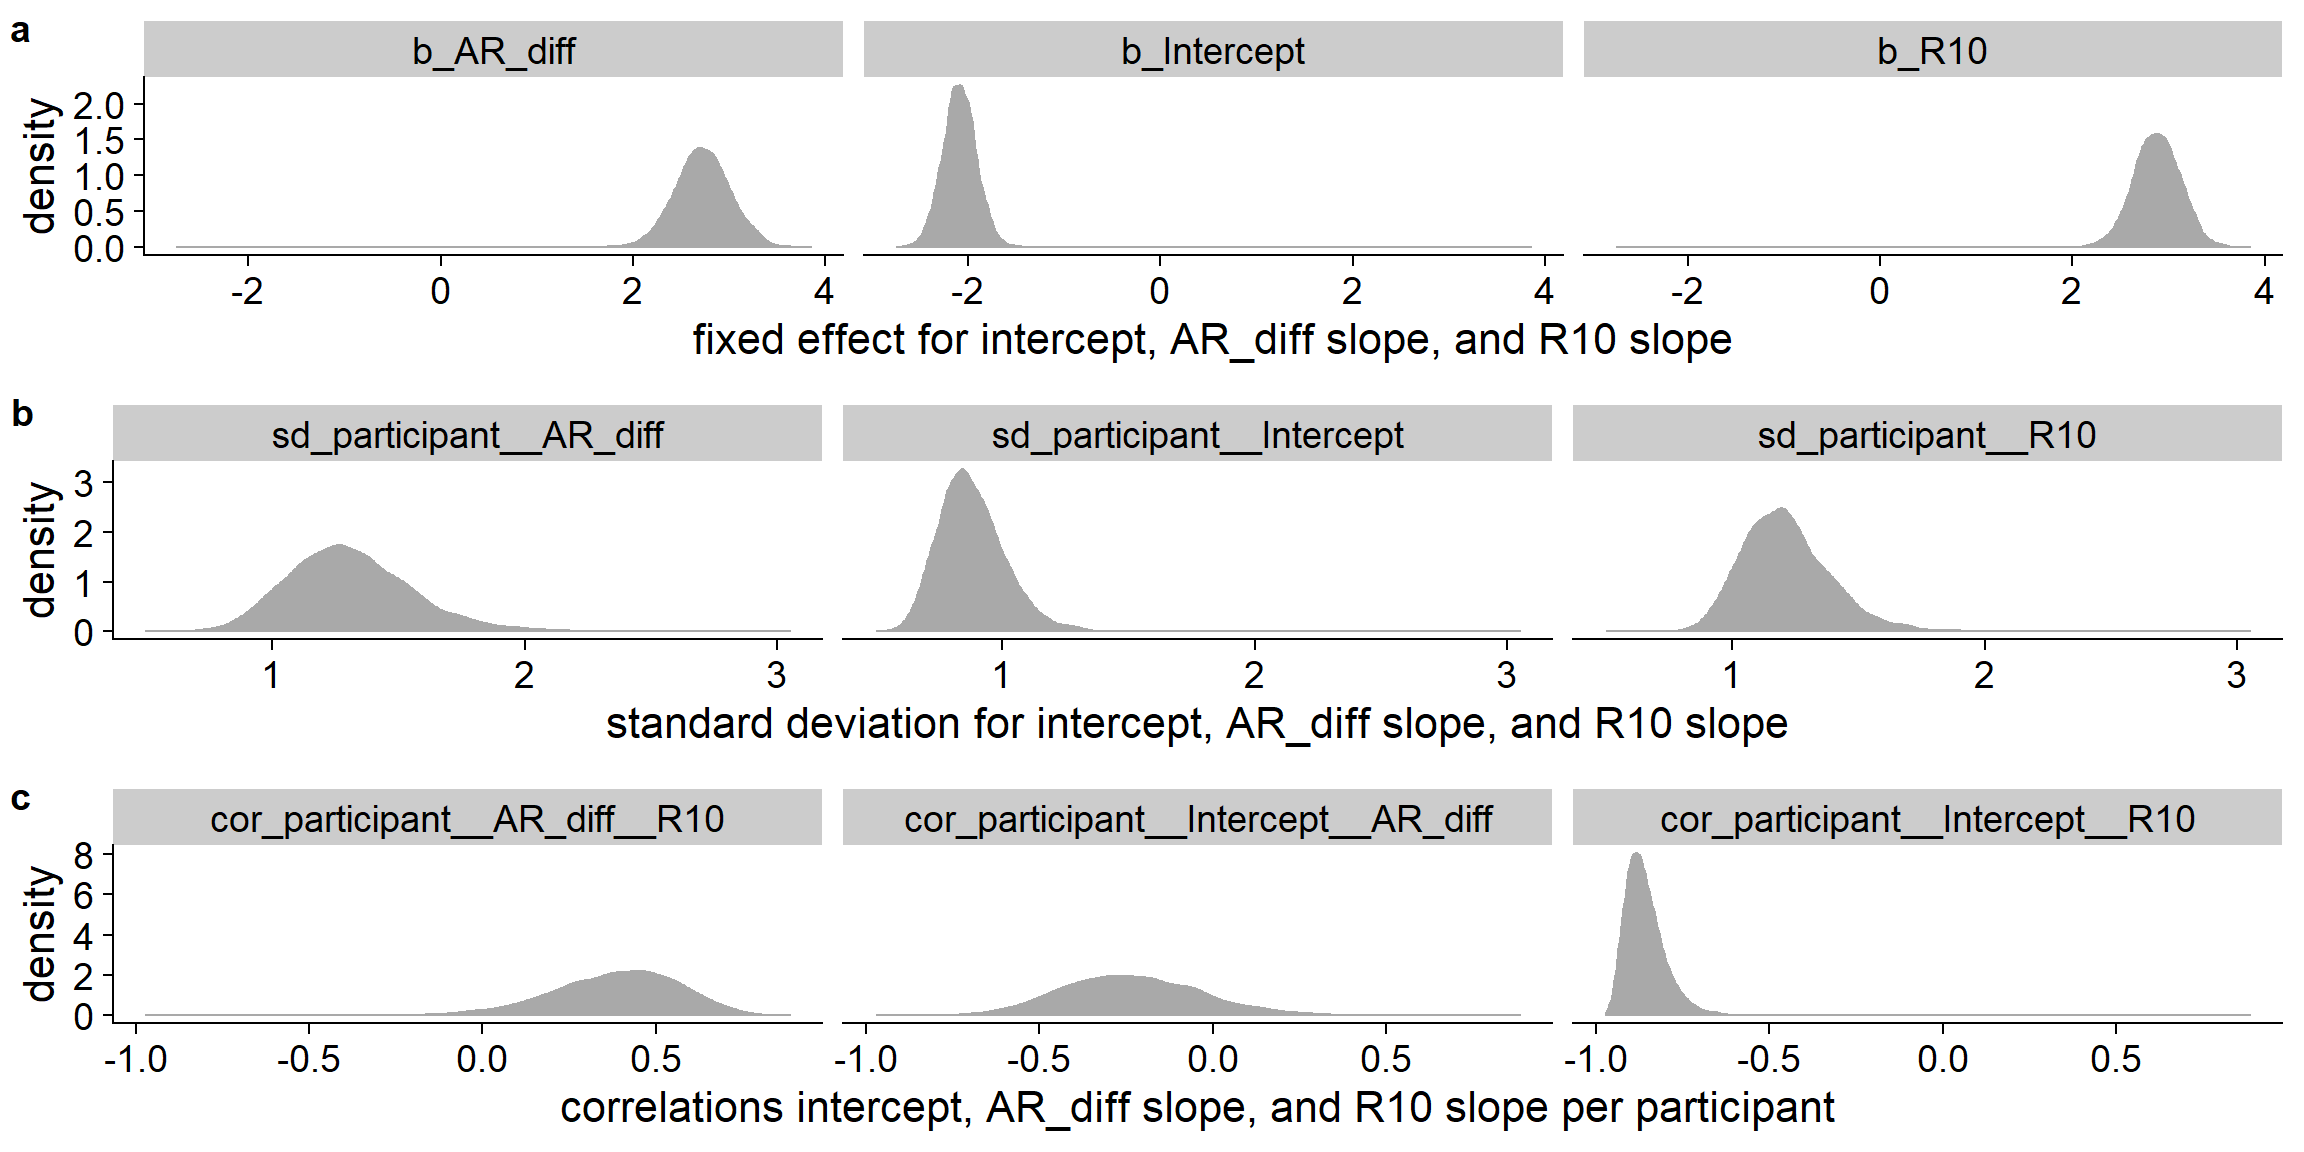 Posterior distributions of fixed effects, standard deviation of random effects, and the correlation between the random effects for the model of perceived L2 orientation.